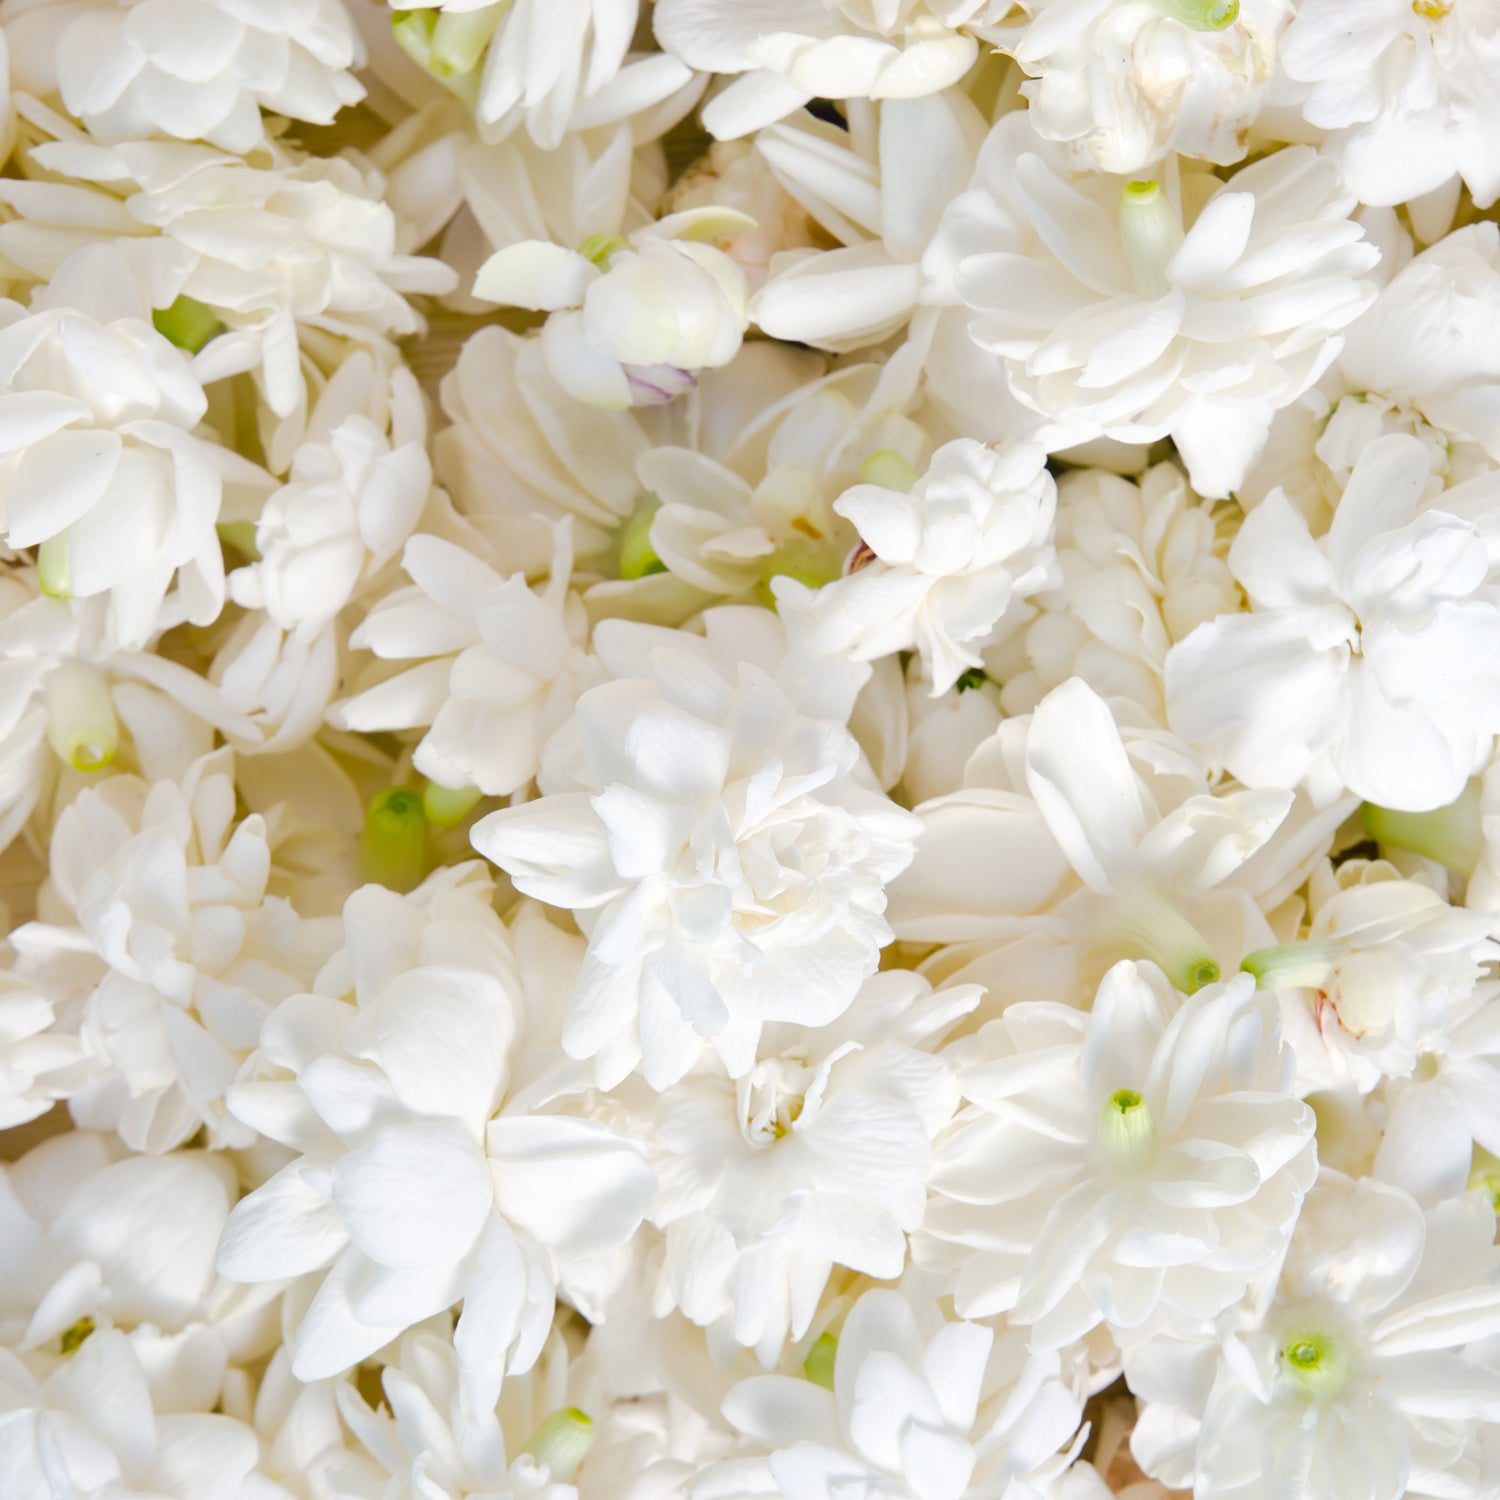 Jasmine flower petals - Jasmine is one of the key fragrance notes in "Best Pals", a pet odor- eliminating candle from Tuscany candle.